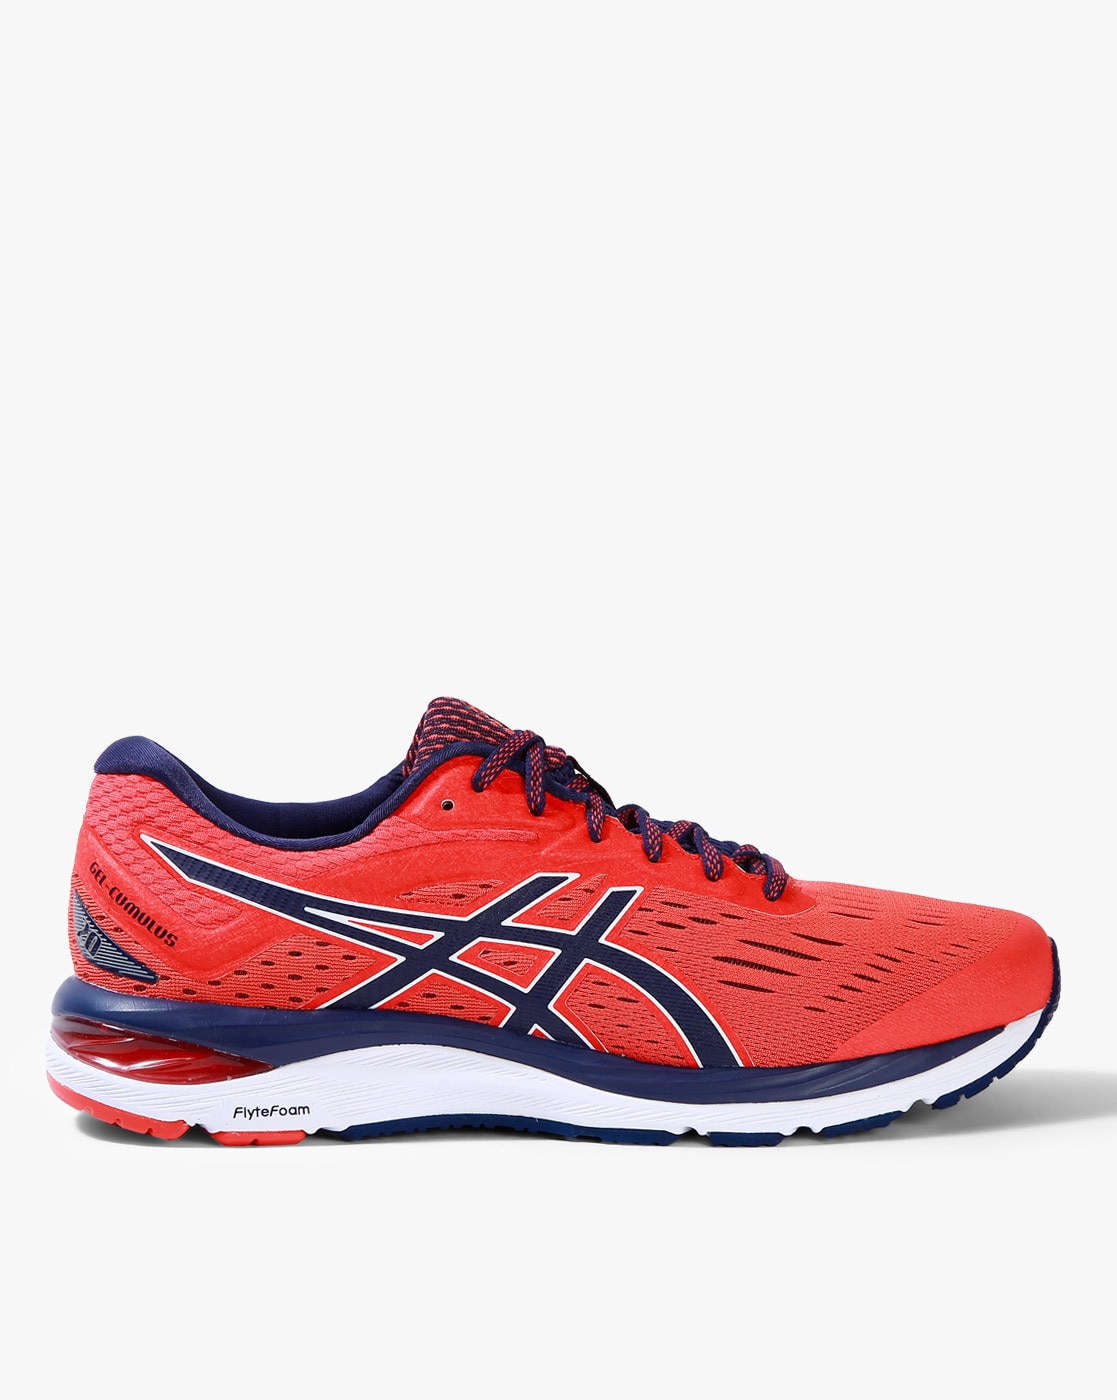 asics shoes red colour